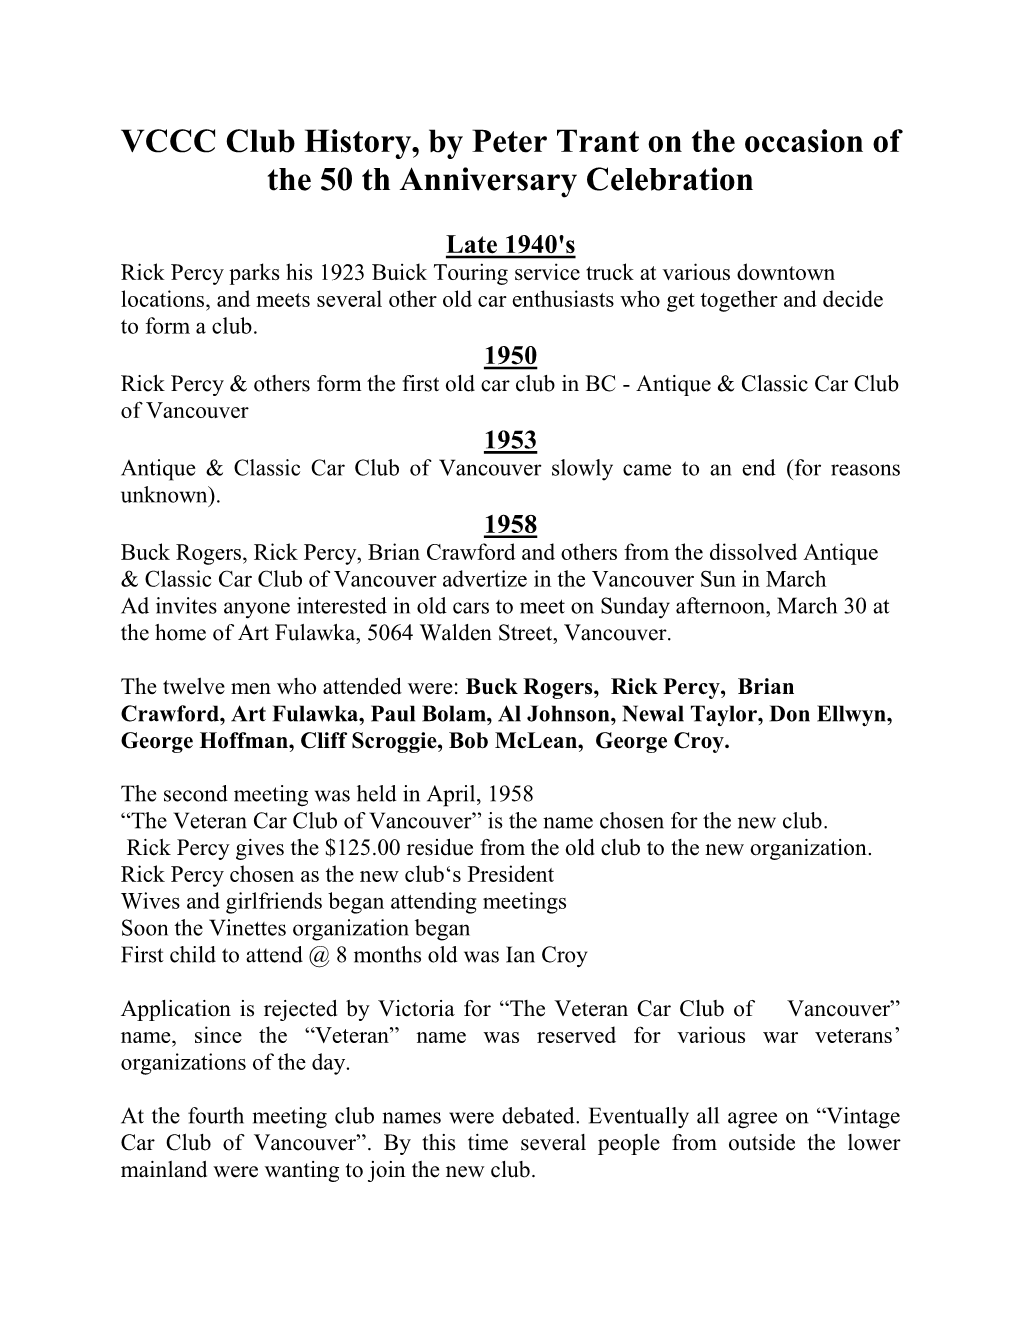 VCCC Club History, by Peter Trant on the Occasion of the 50 Th Anniversary Celebration